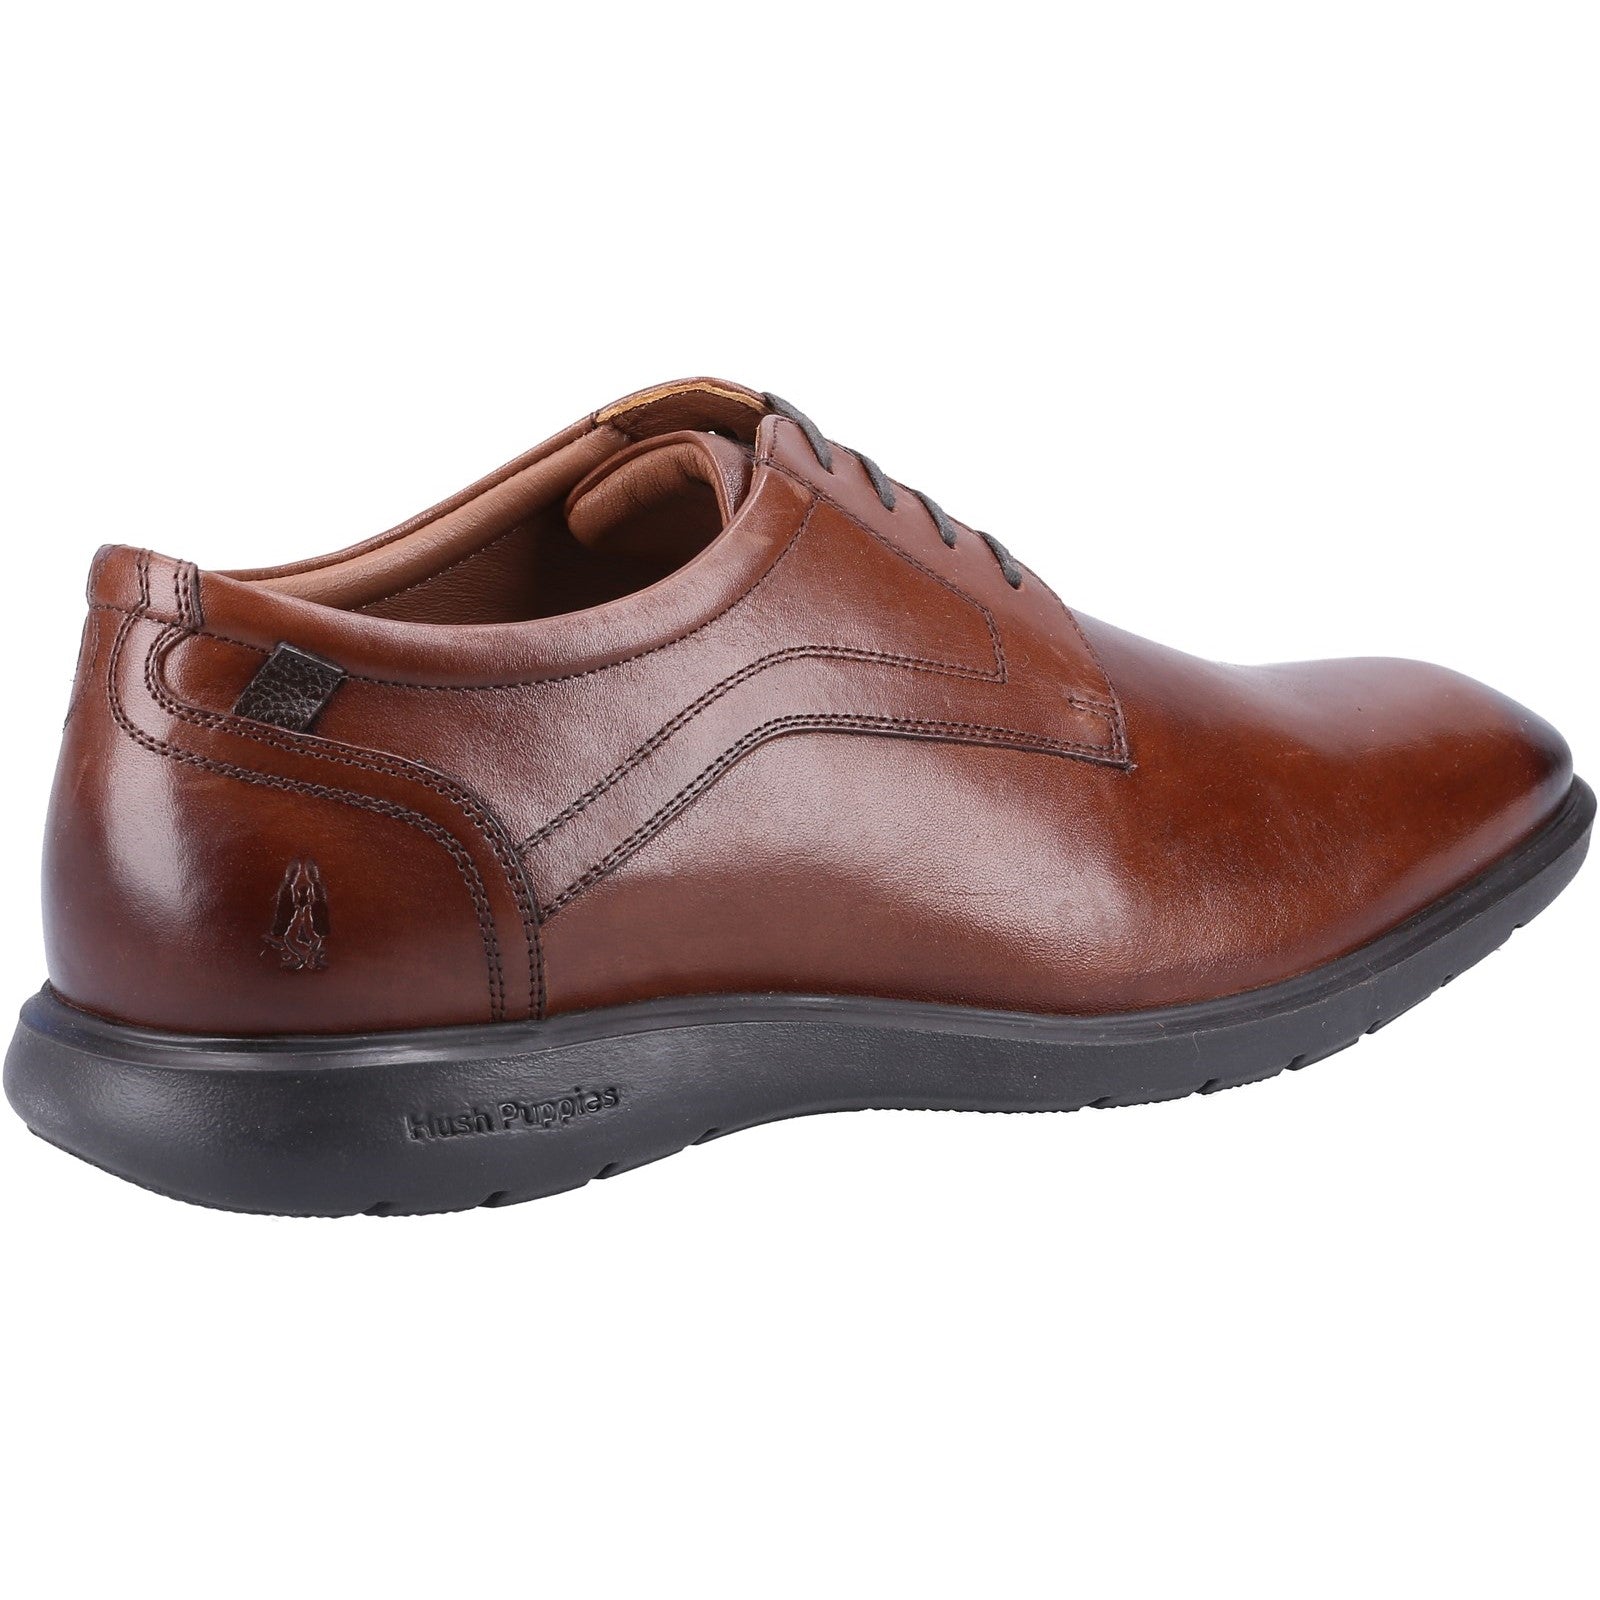 Hush Puppies Mens Amos Leather Shoe - Brown